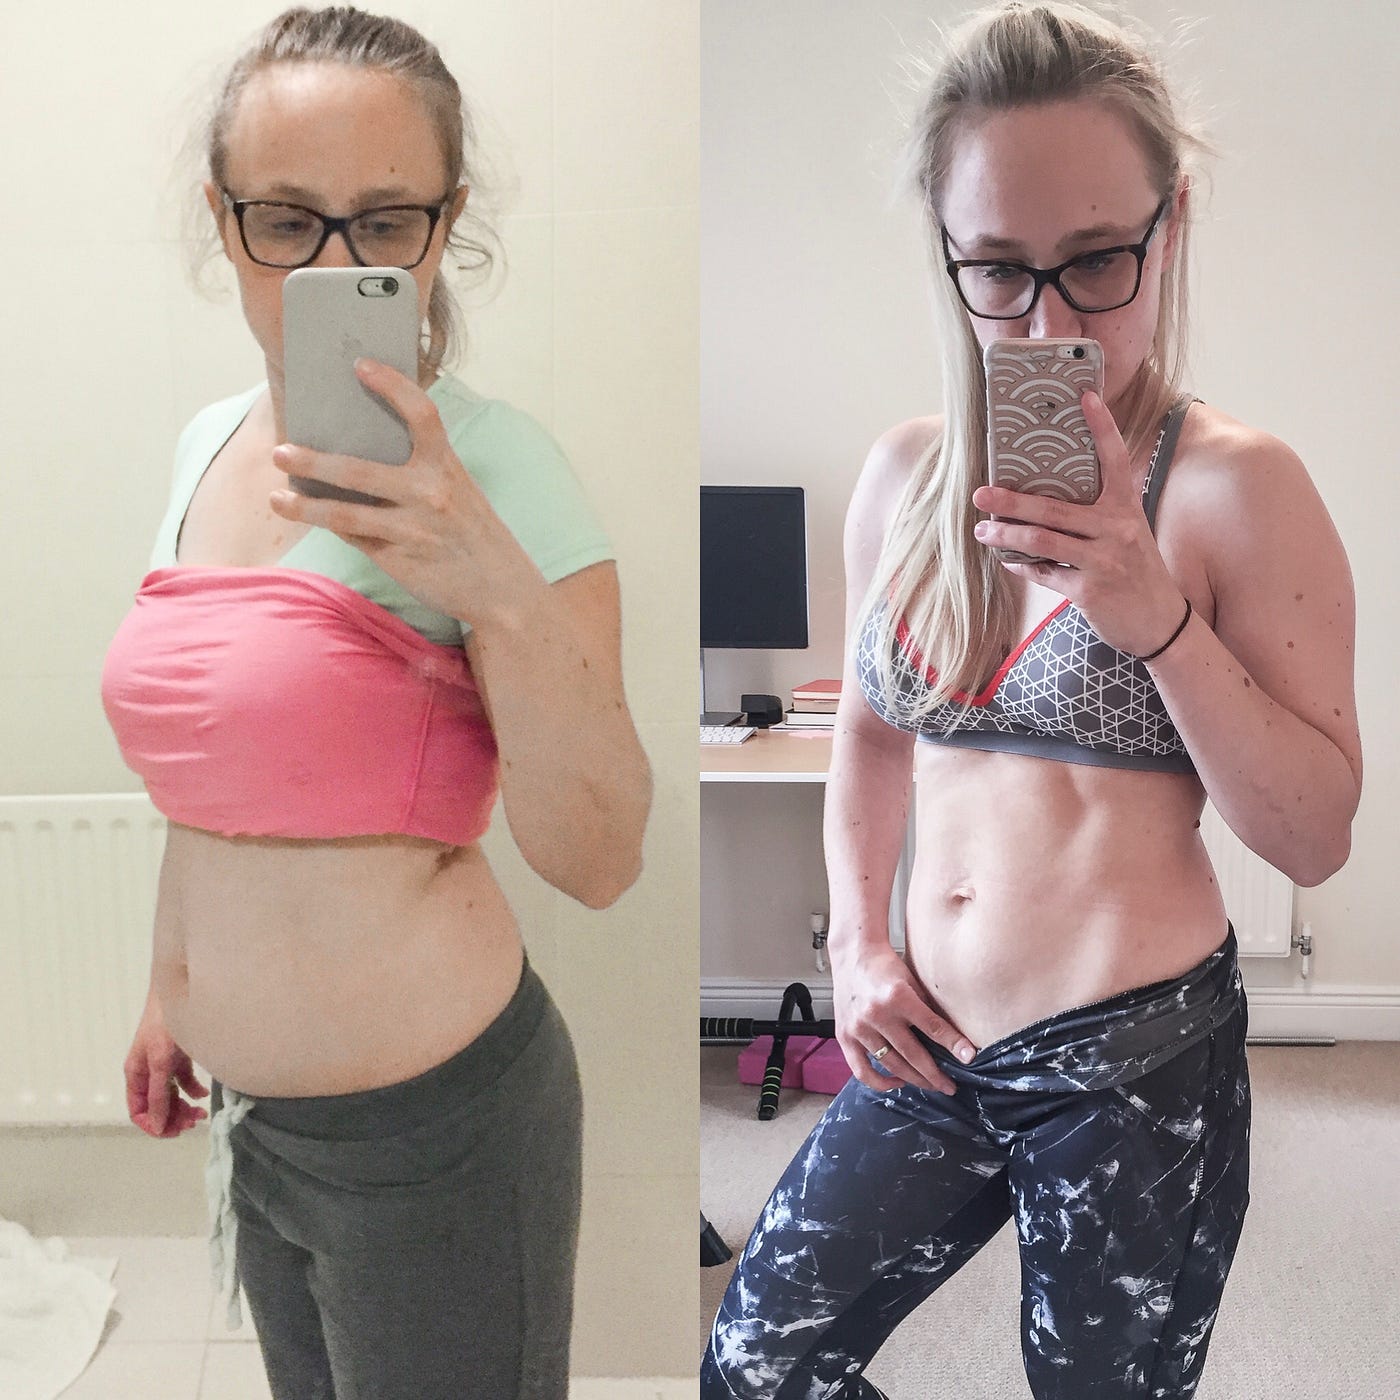 Belly Binding after Baby - Yes or No? — OUR FIT FAMILY LIFE